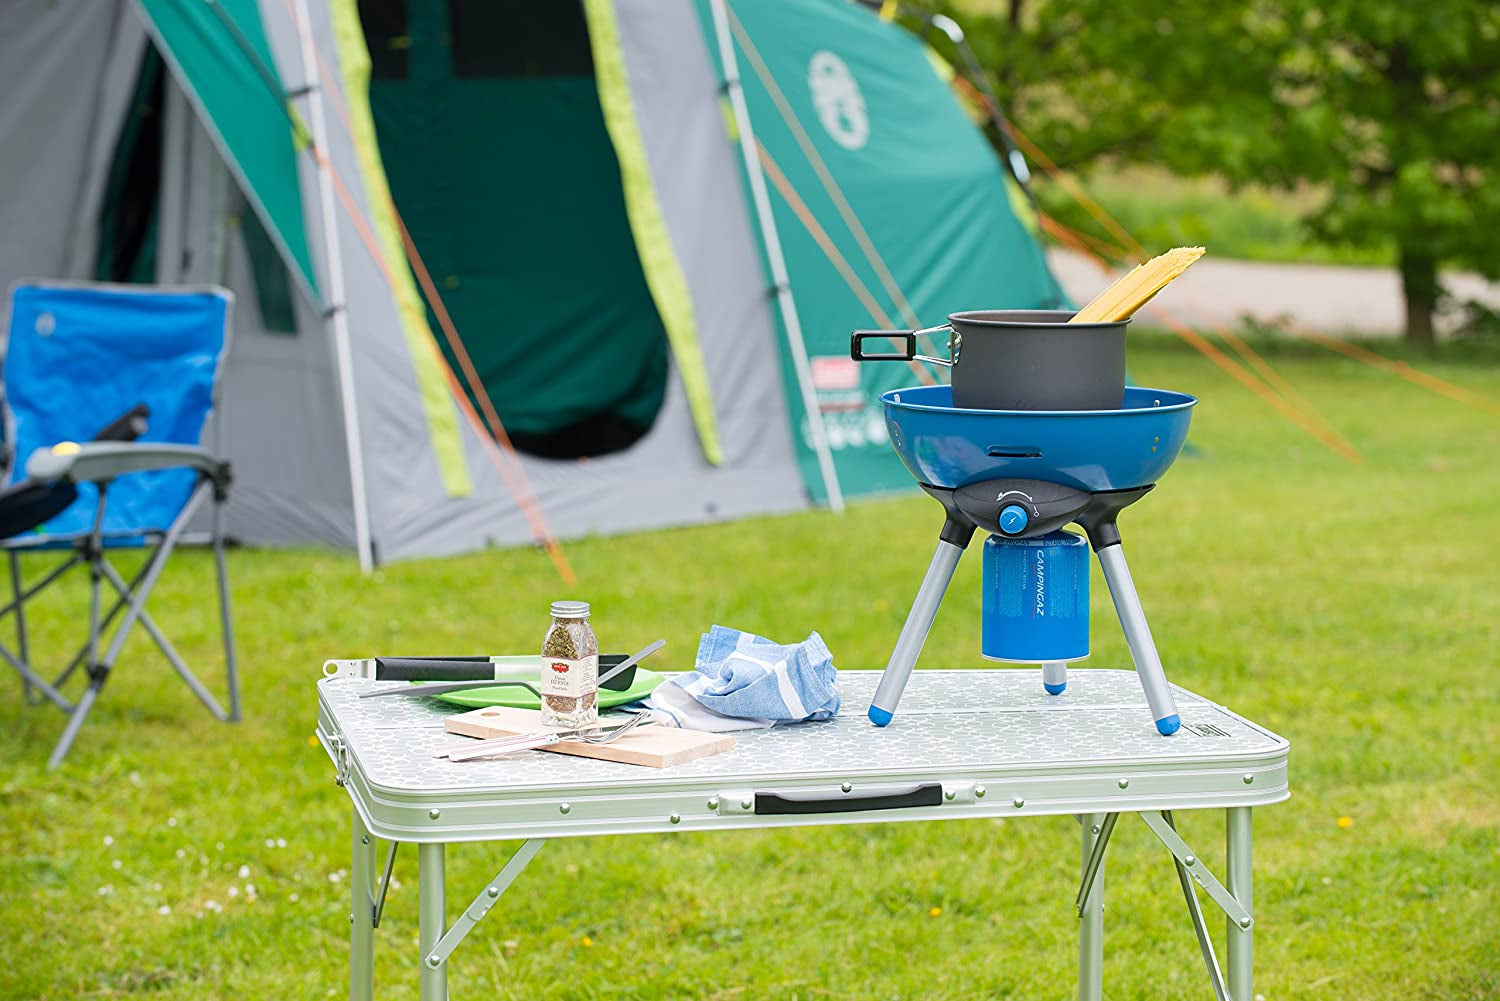 Party Grill Gas Stove, Small Gas Grill and Camping Cooker in One, Camping Stove for Camping or Festivals, Versatile Cooking Options, Space-Saving to Transport